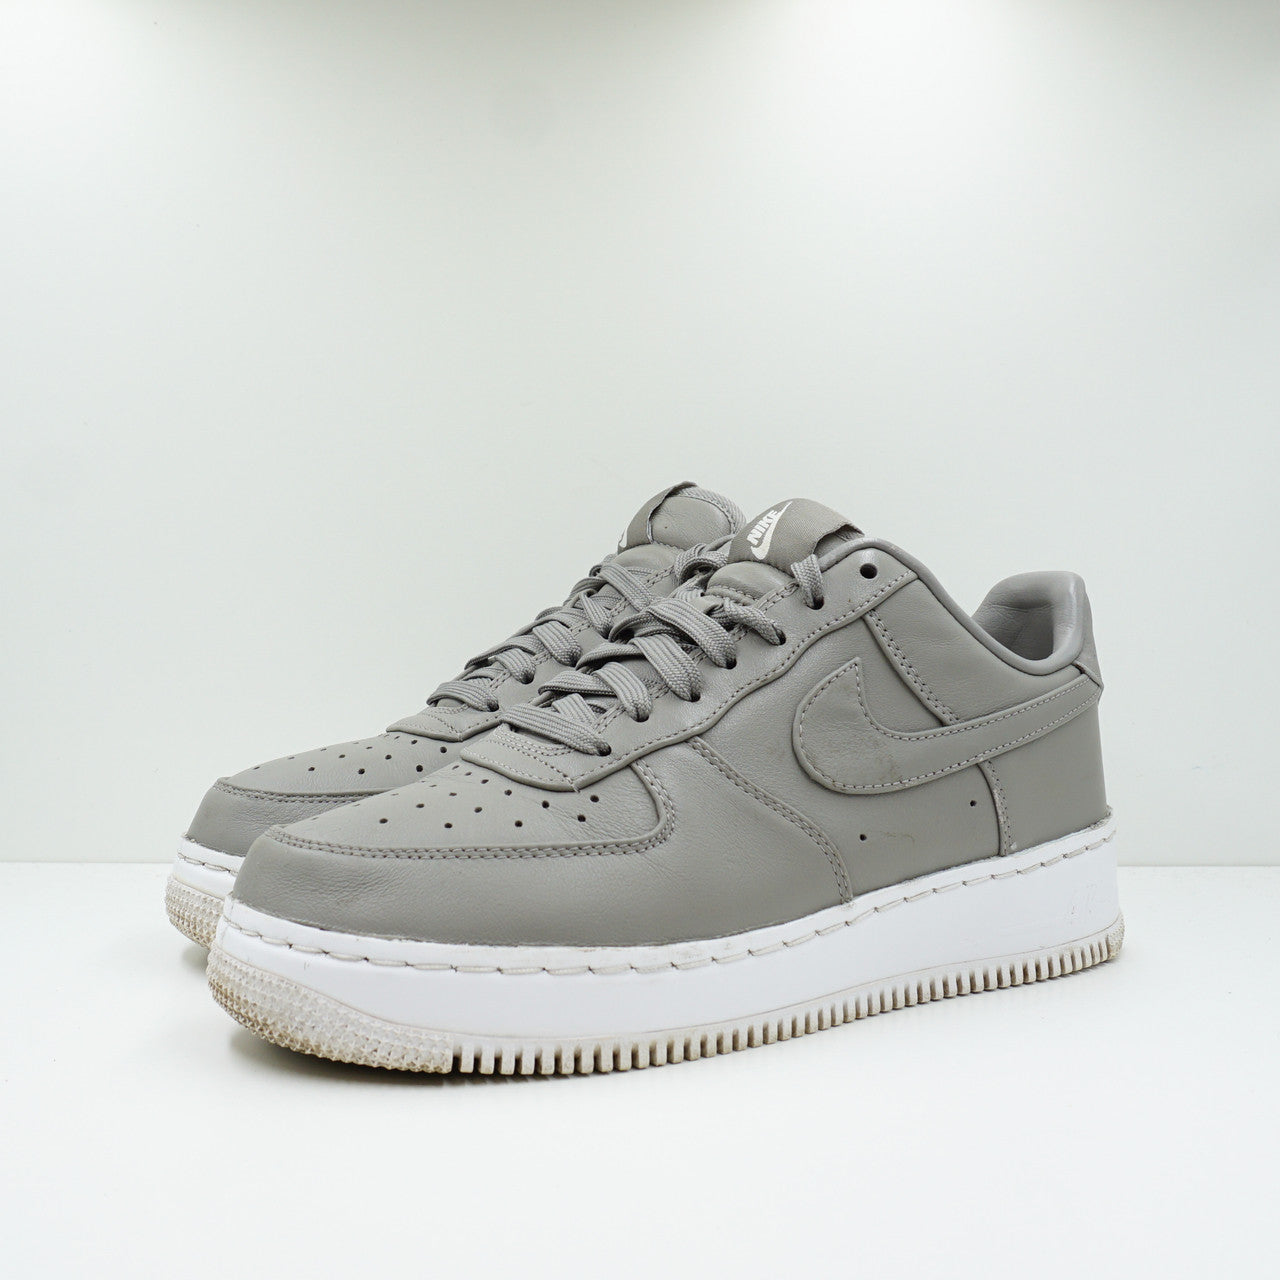 Nike Air Force 1 Low Light Charcoal